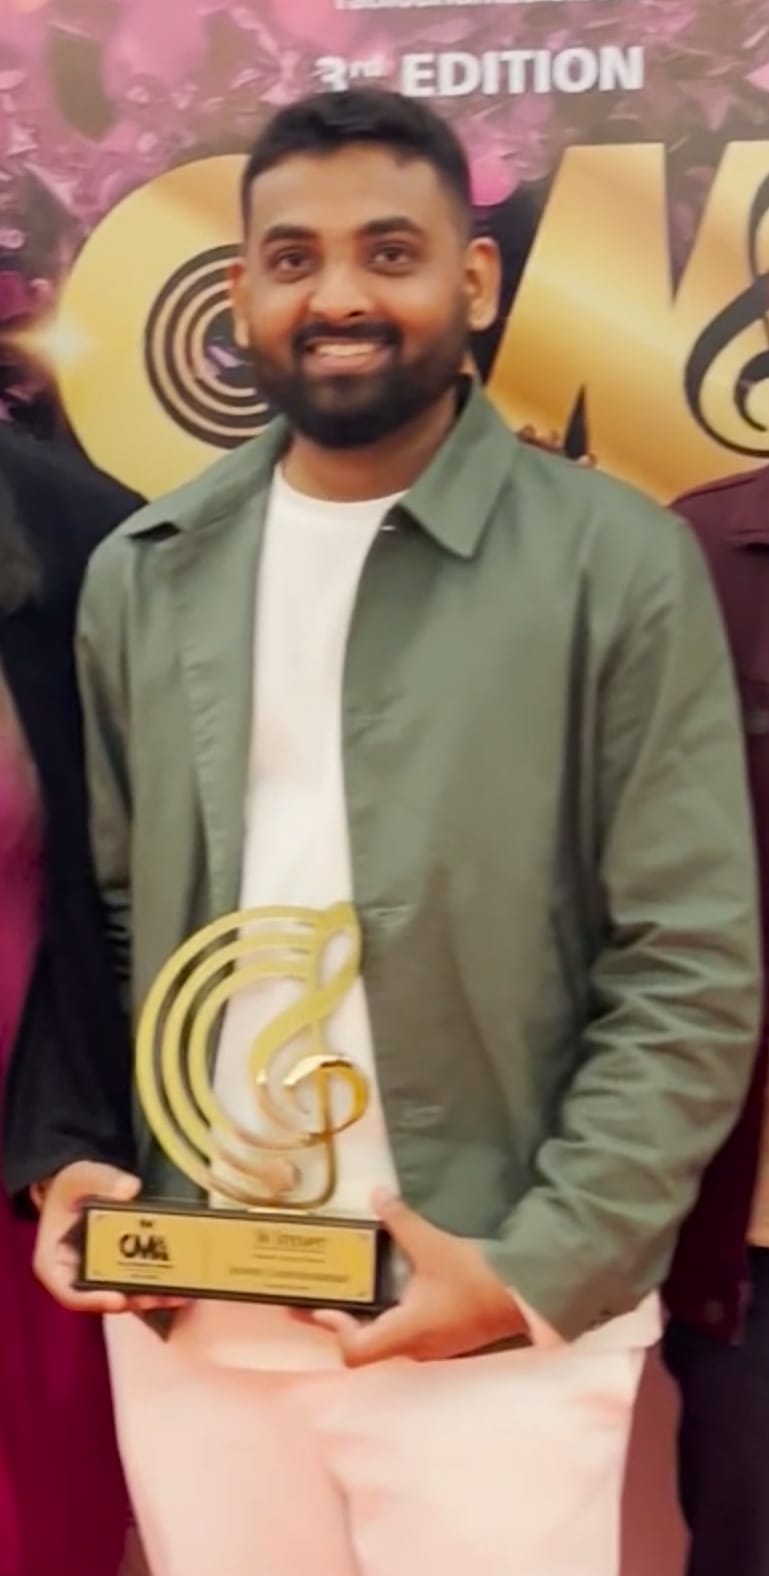 Sunny Subramanian triumphs at Clef Music Awards 2023 with Ghodey Pe Sawaar from the Netflix film Qala